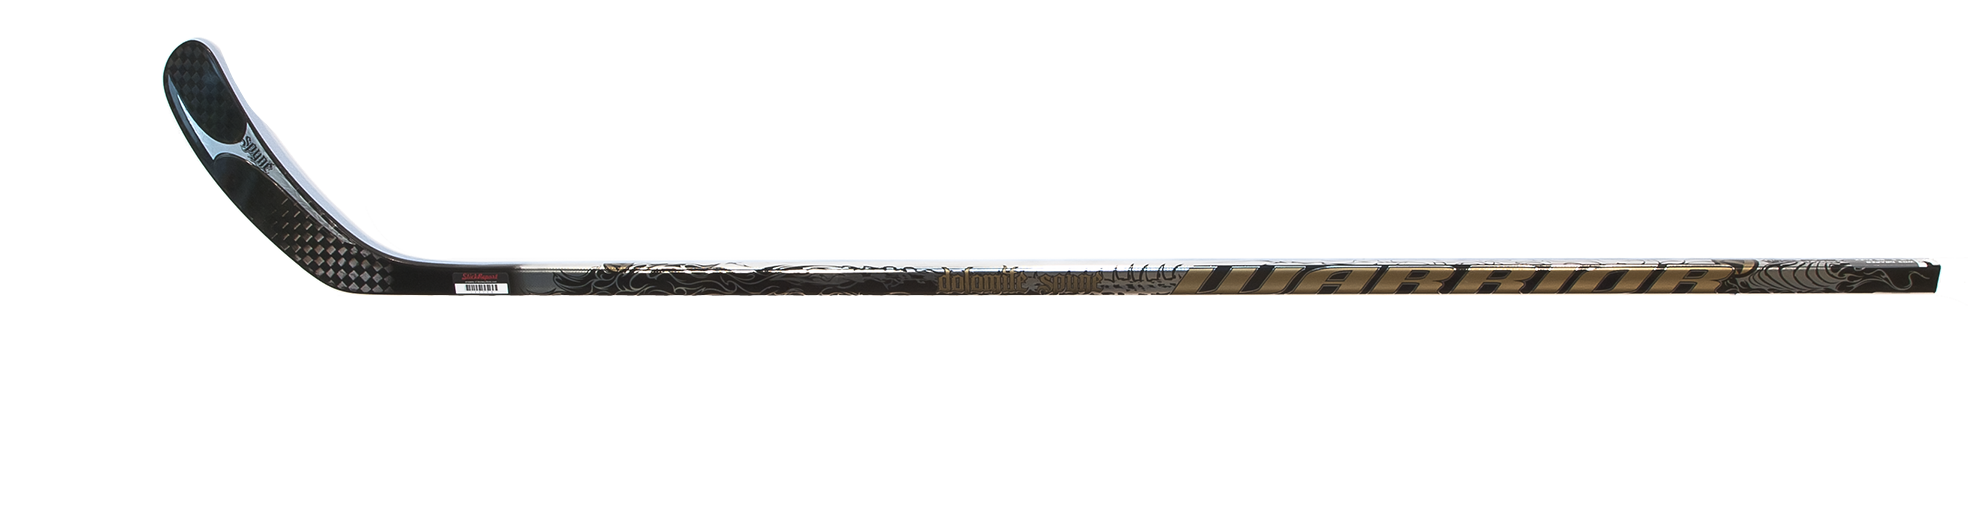 Download PNG image - Hockey Stick PNG Photos 